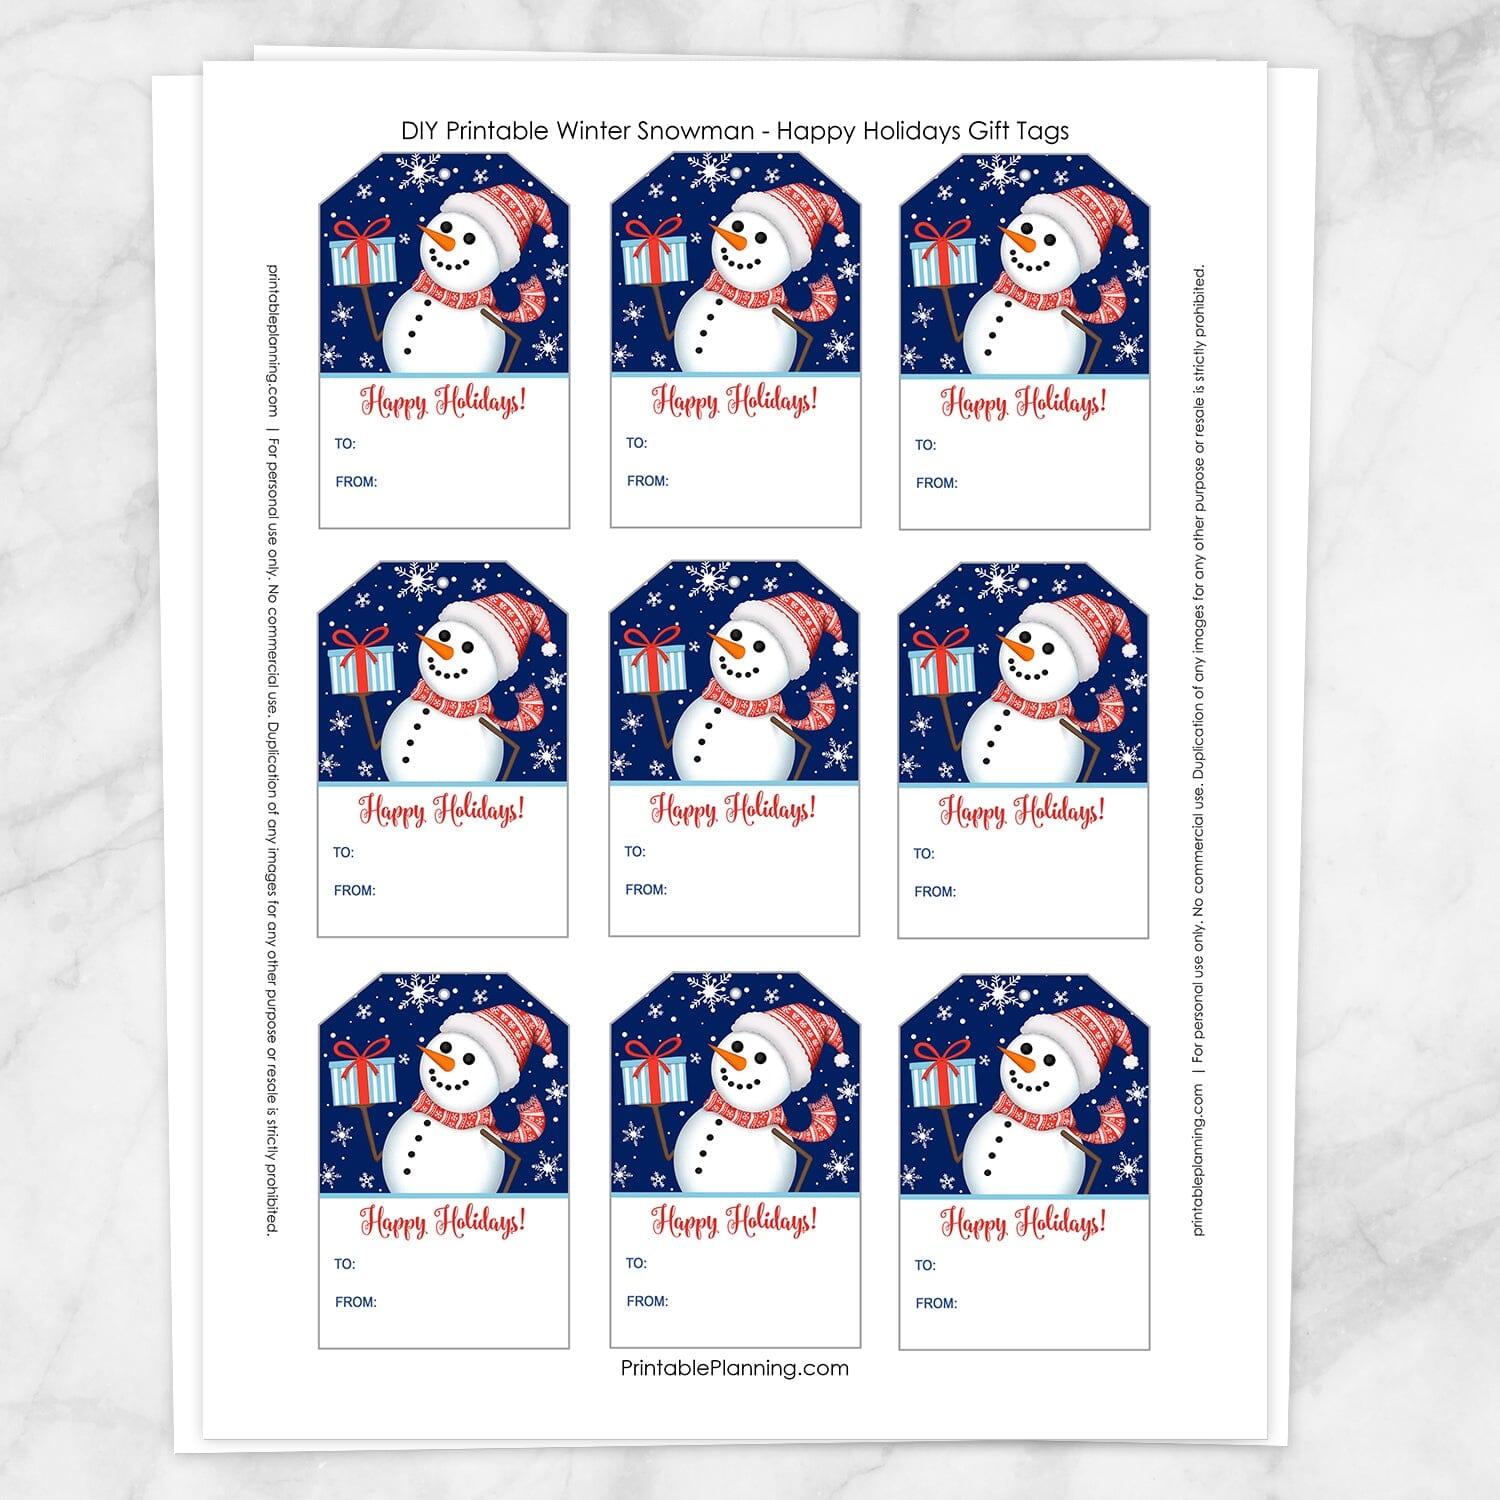 Printable Winter Snowman Happy Holidays Gift Tags from Printable Planning. Image shows full page when printed.